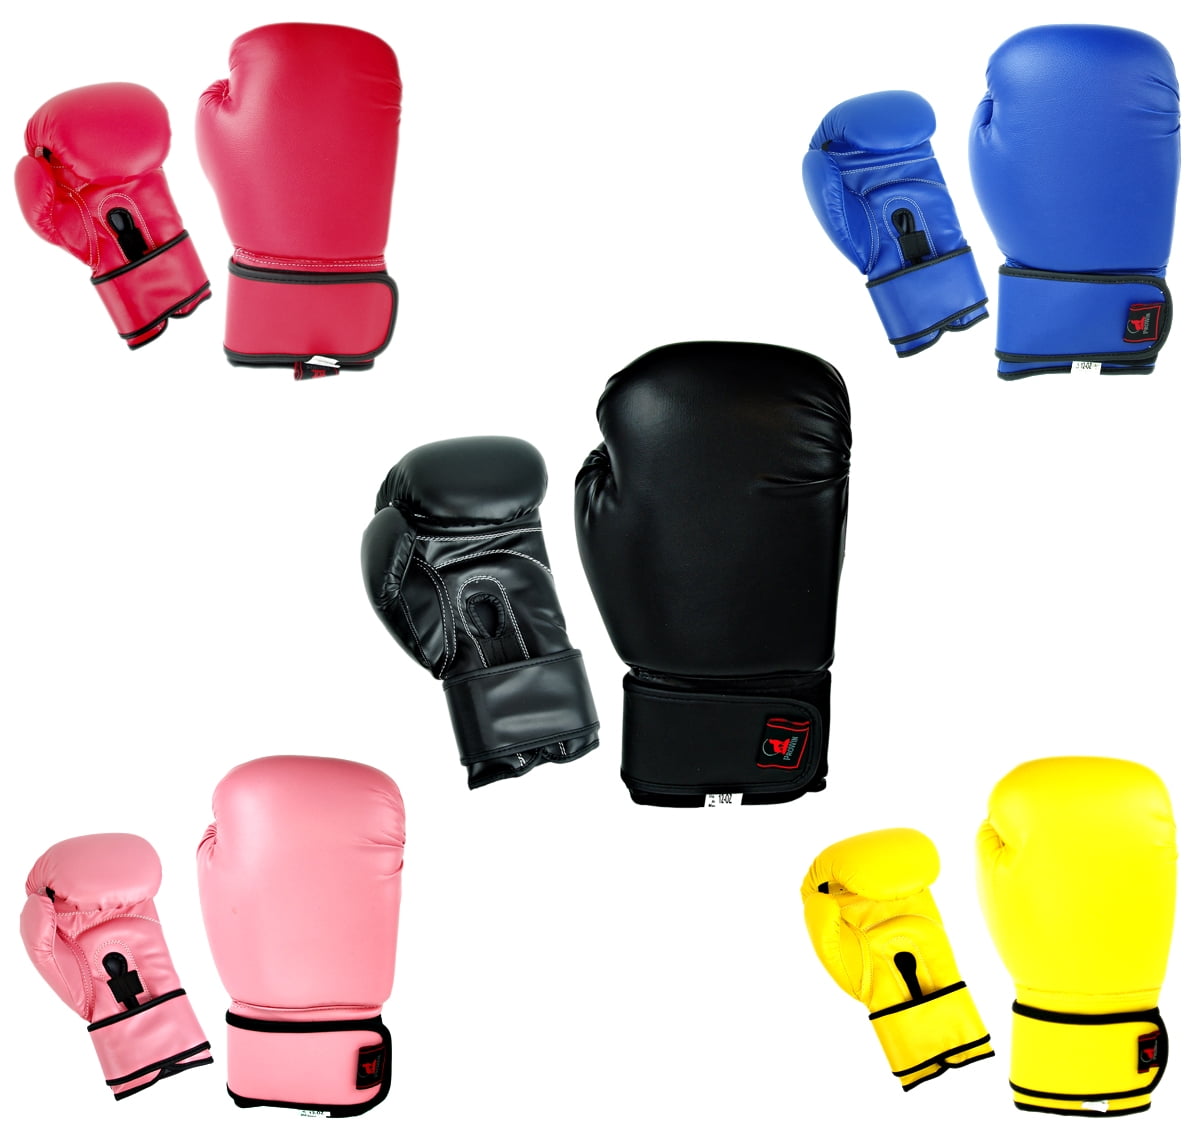 Details about   Junior Boxing Focus Pads Punch Gloves Set Sparring Kids Martial Arts Training 